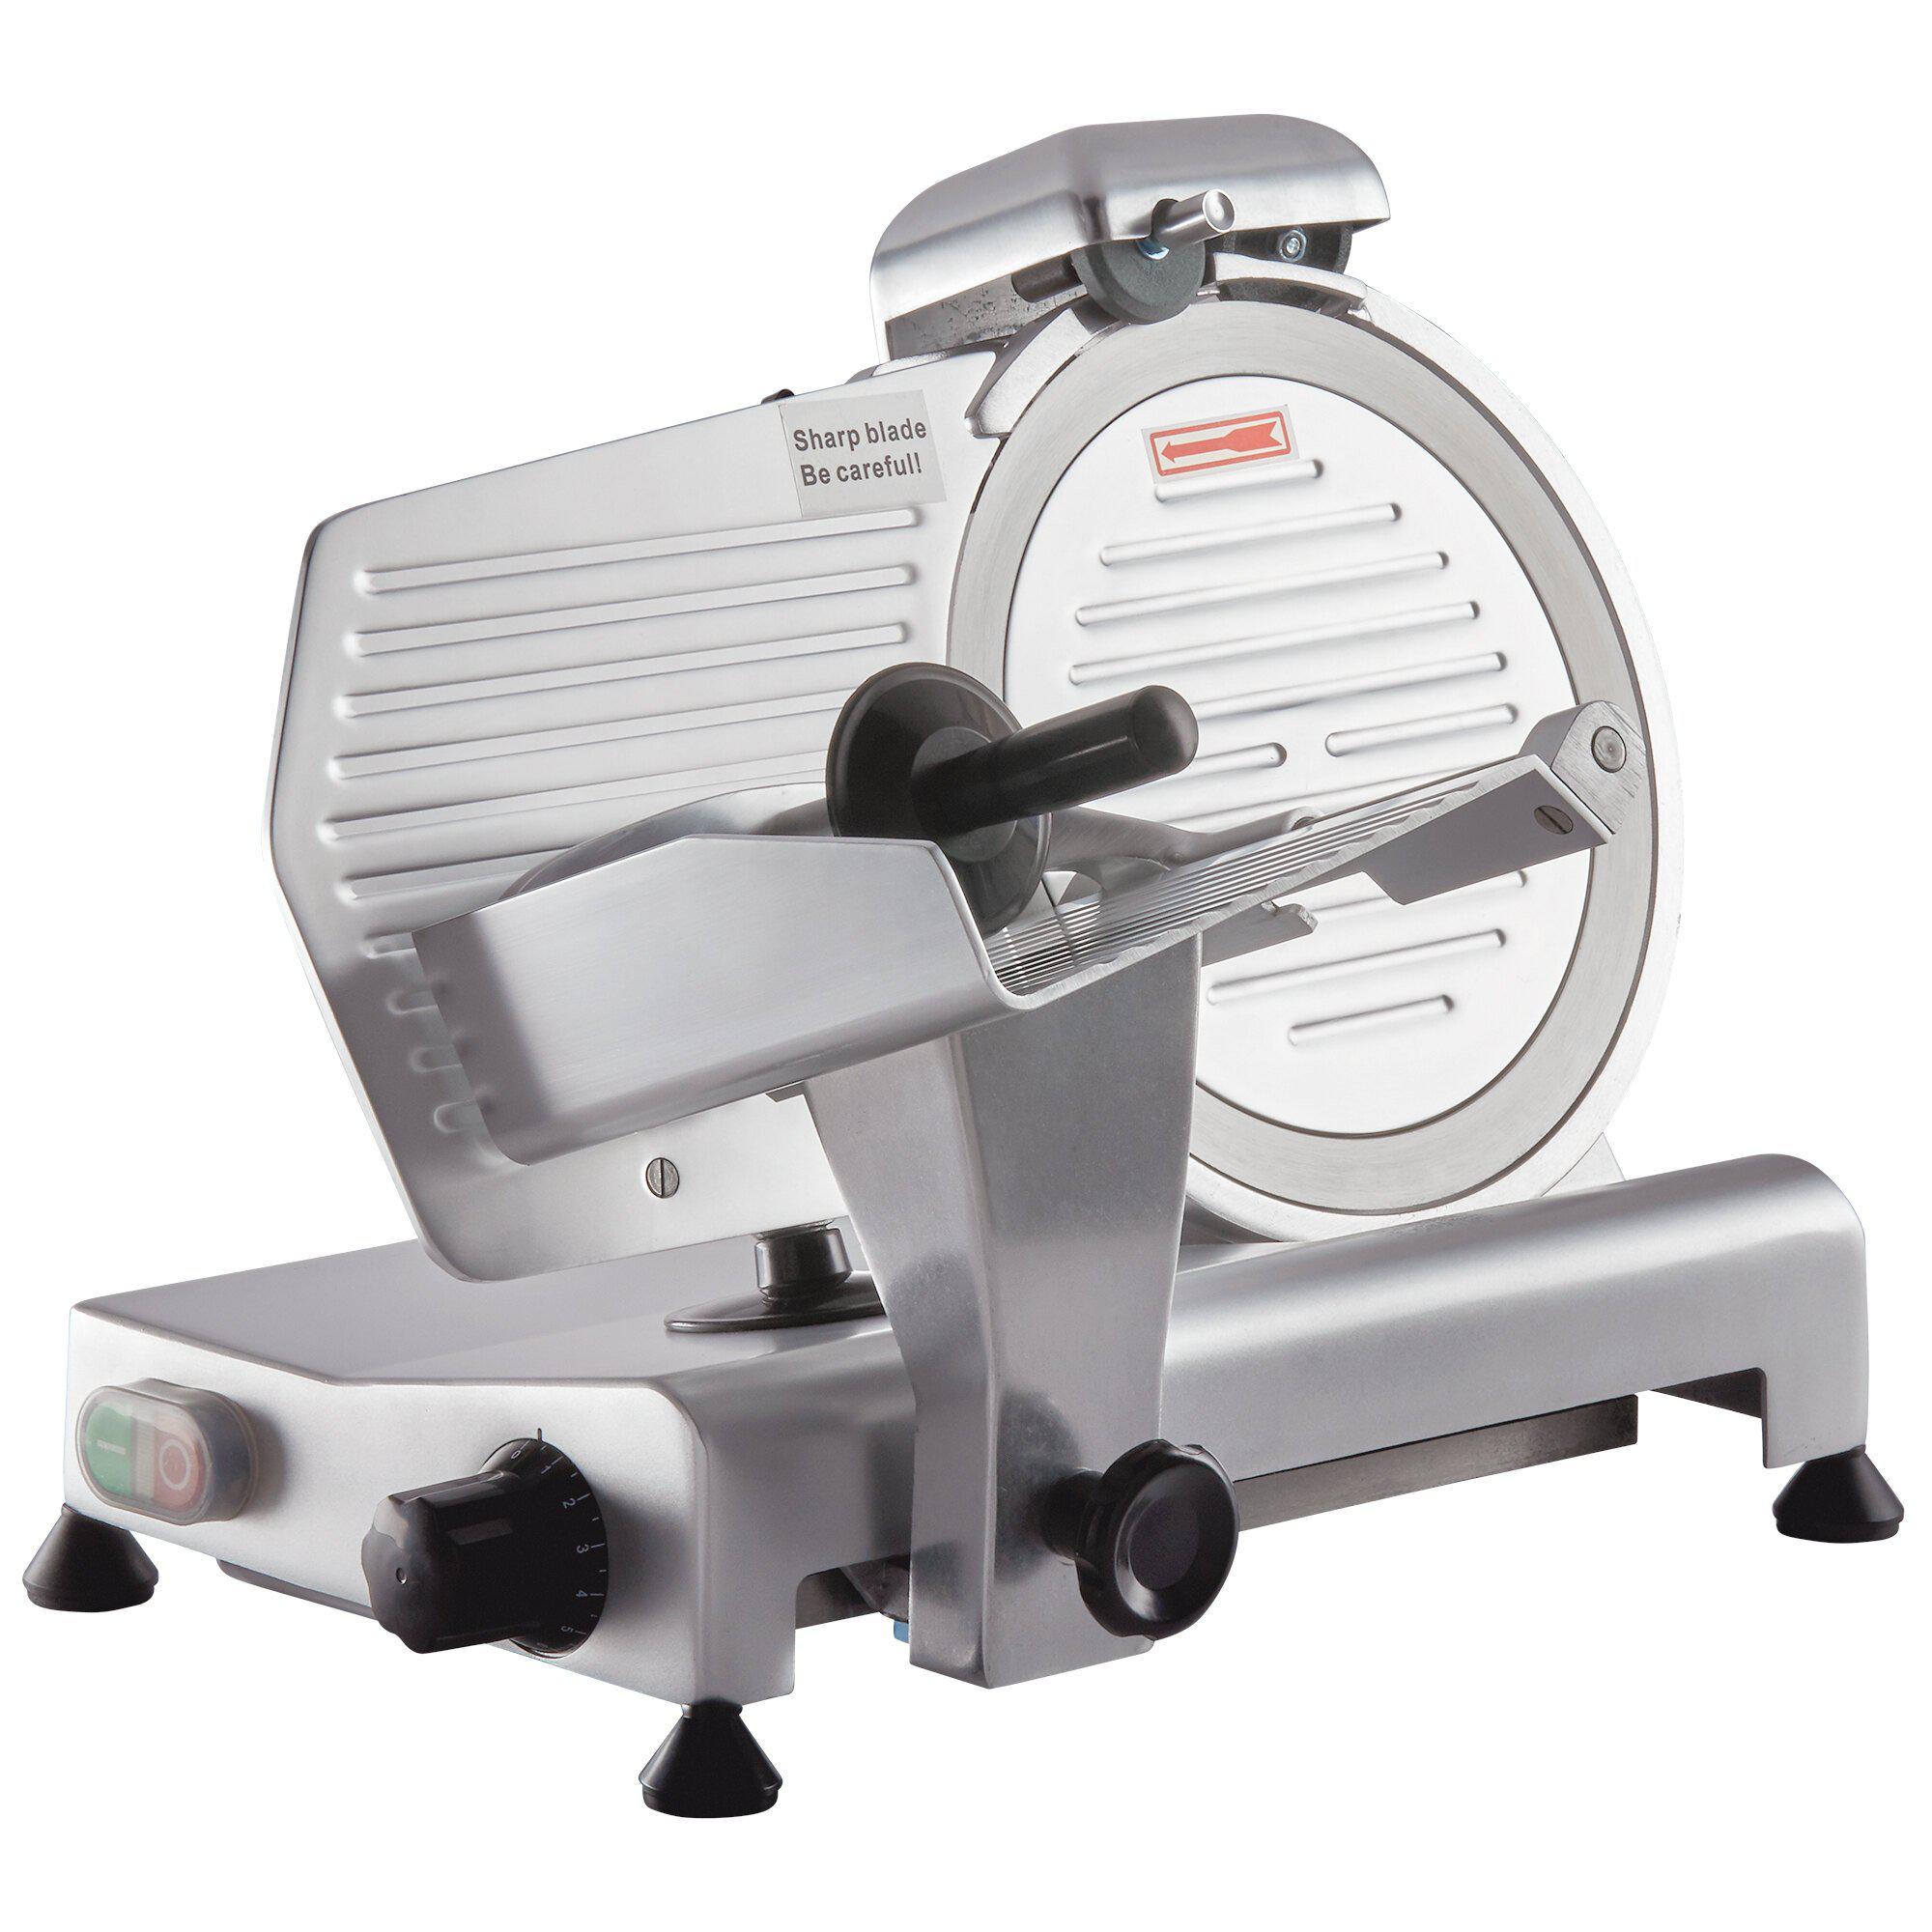 Consiglio's 8.6" Belt Driven Meat Slicer